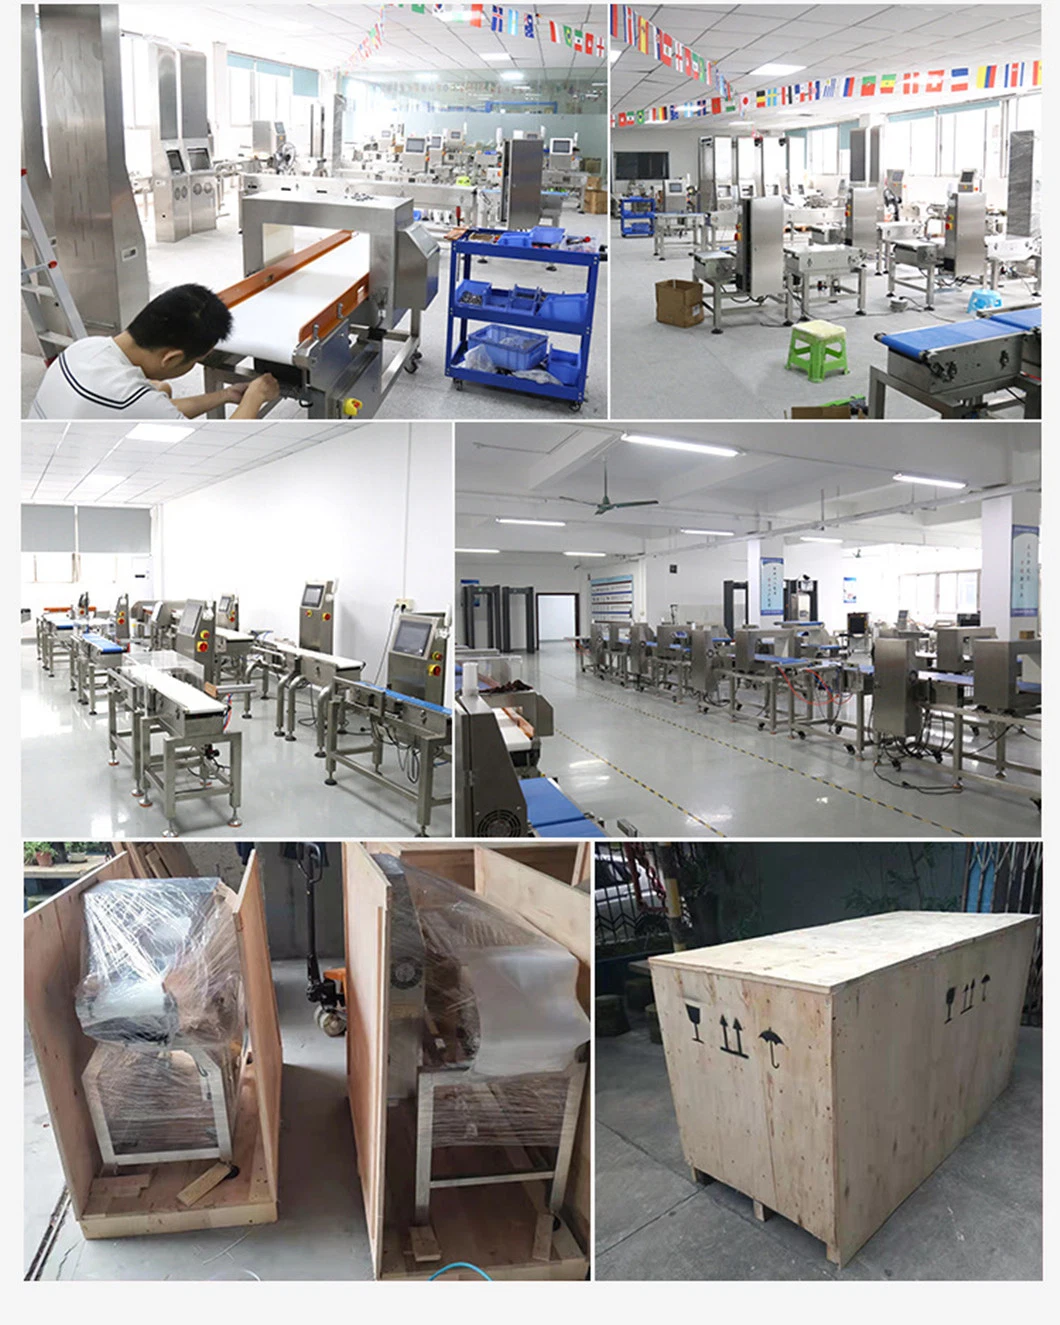 High Accuracy Wholesale Conveyor Belt Ndc-a Needle Detector Machine Needle Broken Needle Metal Detector Widely Used in Textile and Food Industry Customized